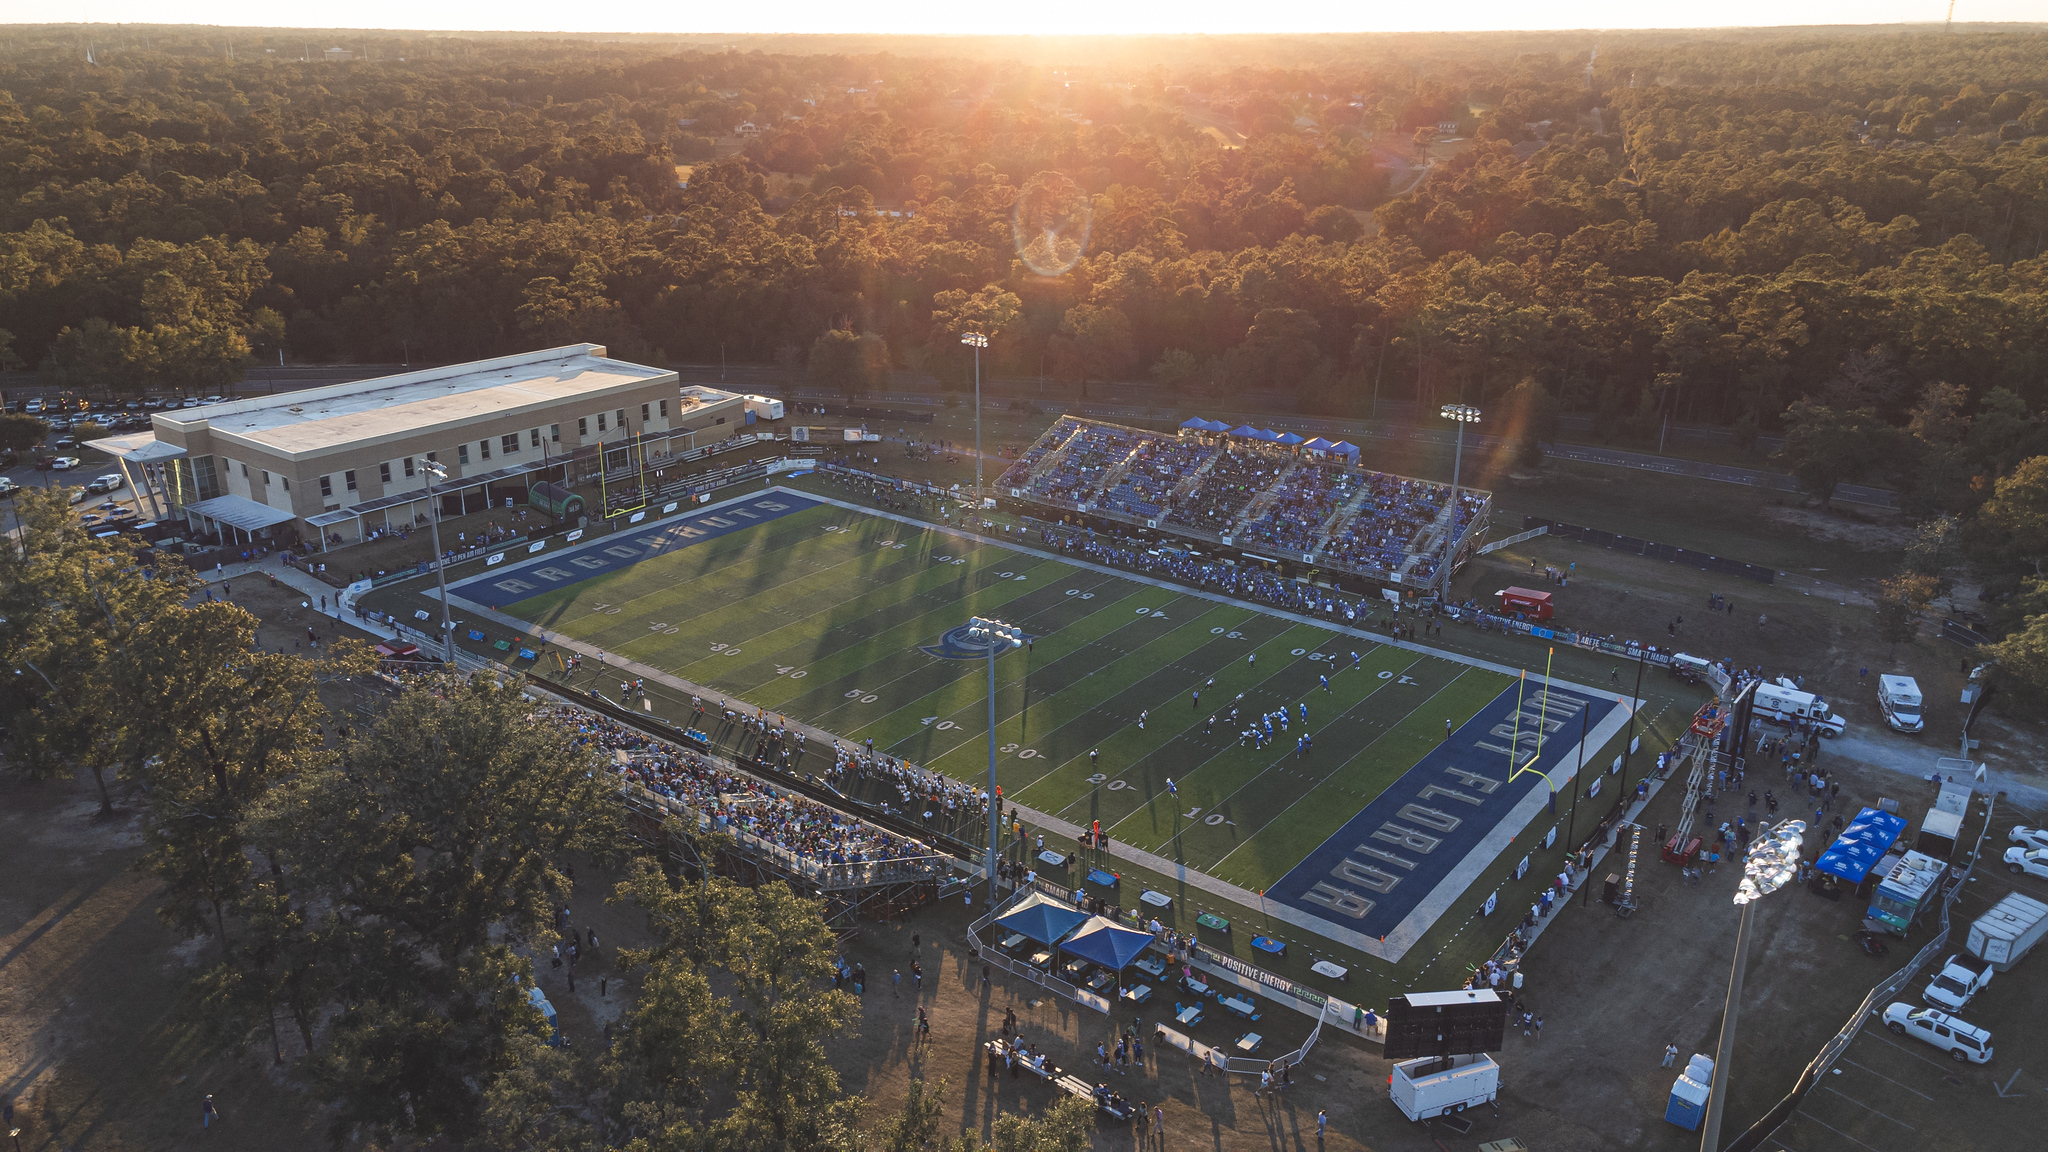 Birds eye view of the UWF football field during home game